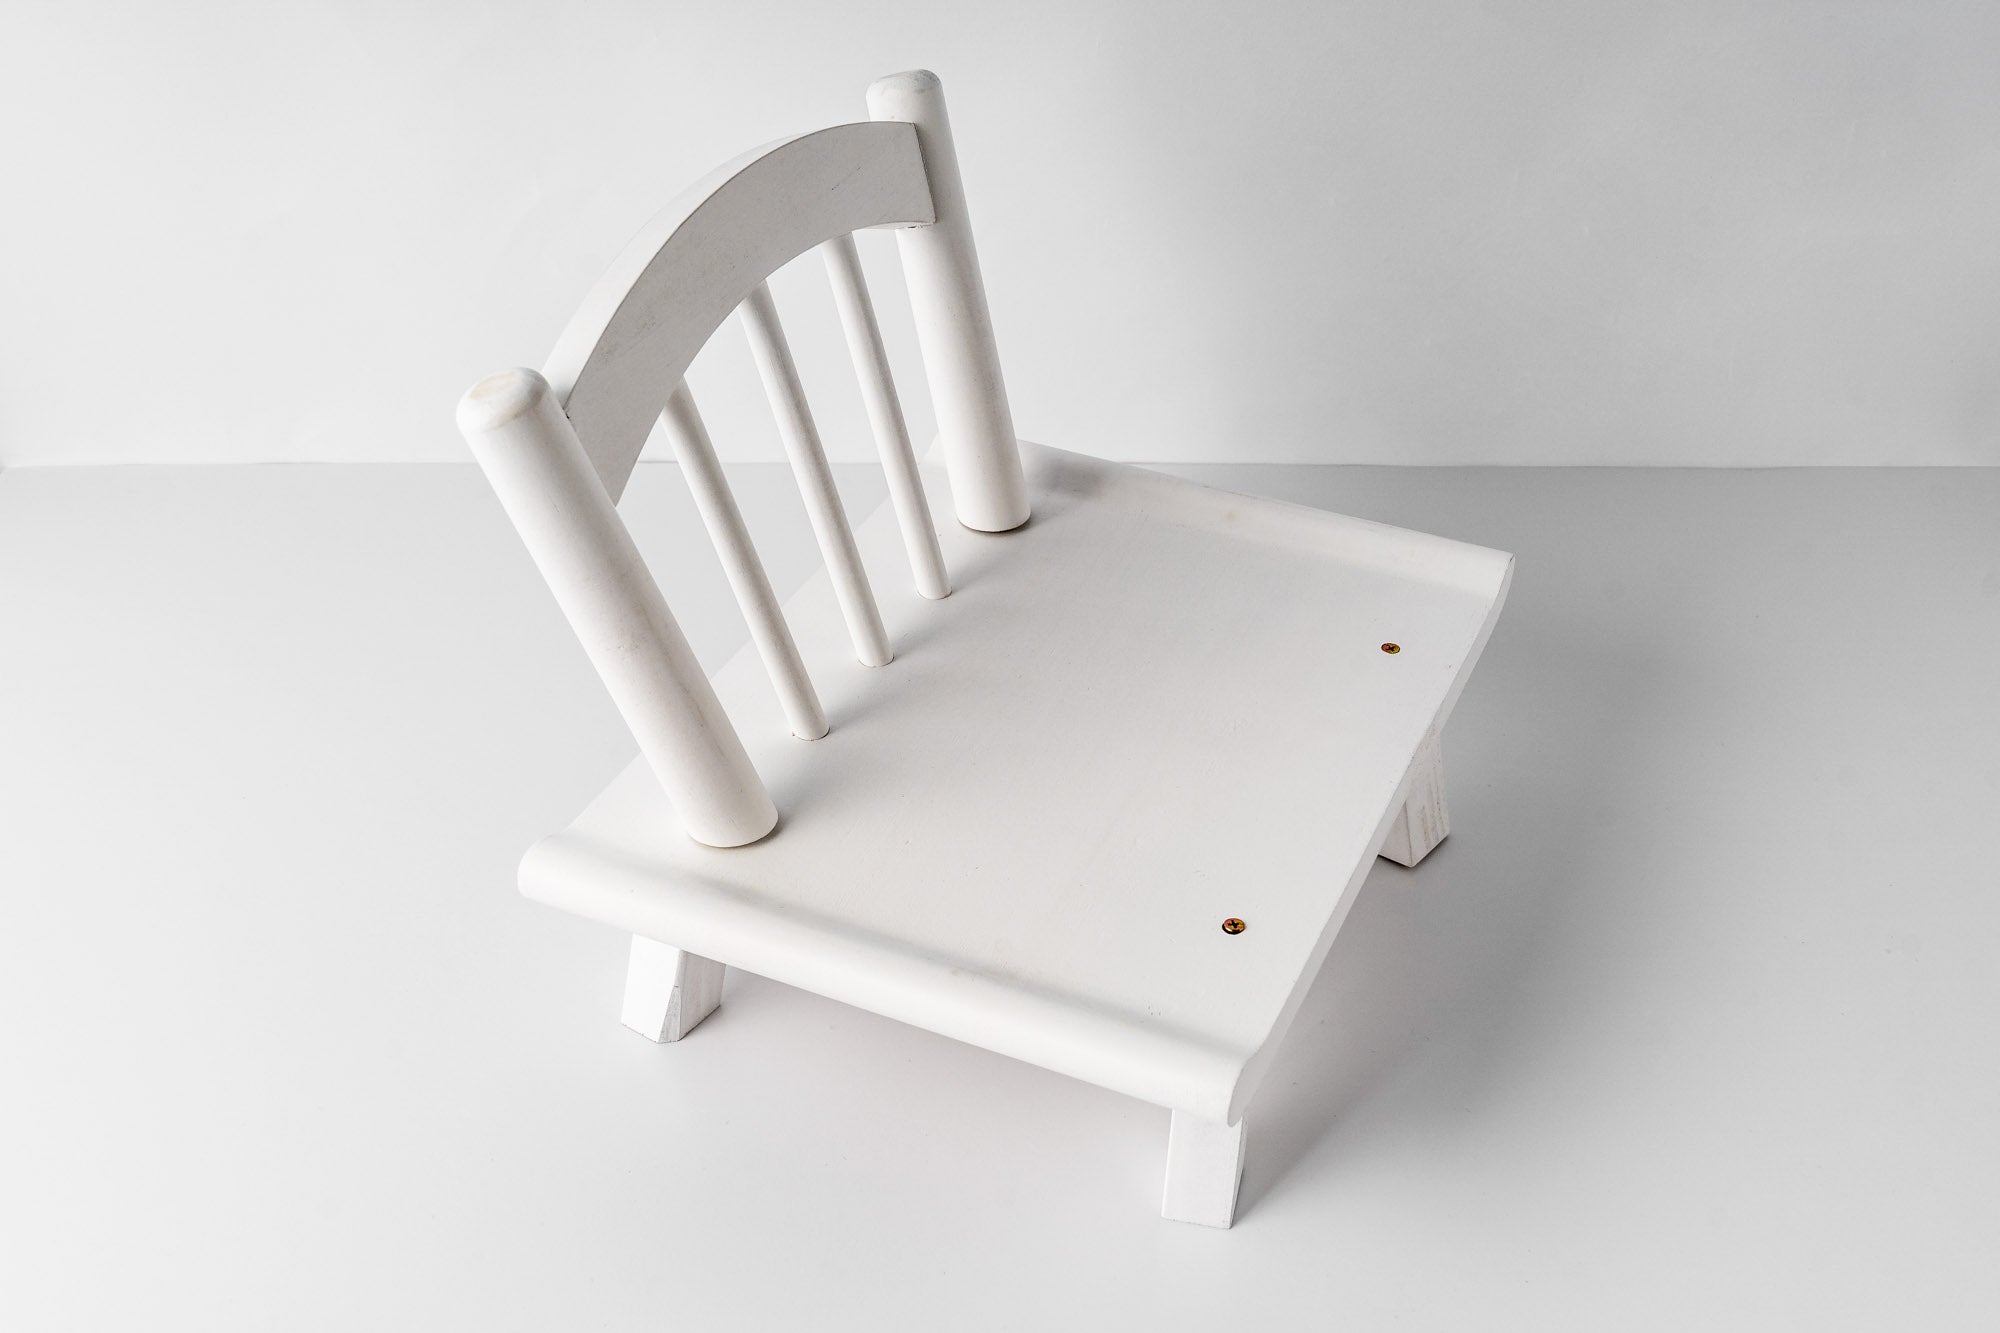 Kate Newborn White Wooden Chair Photography Props